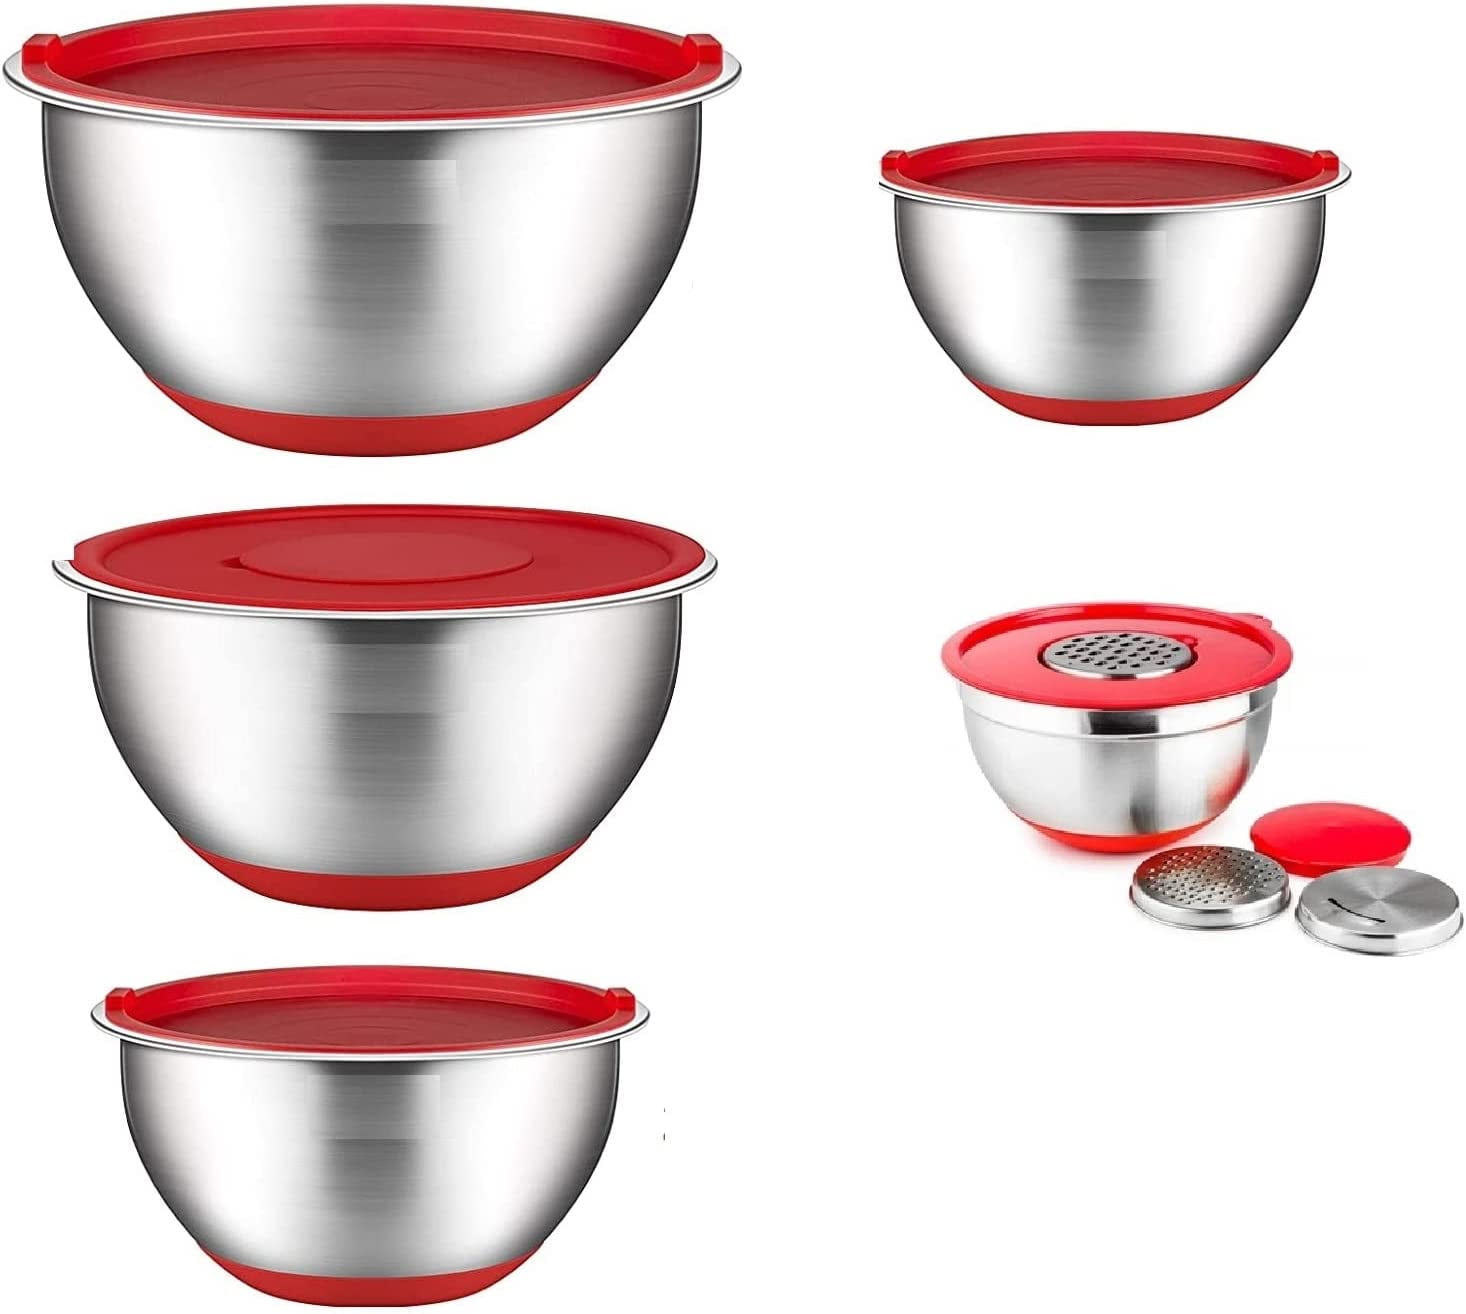 Best Stainless Steel Mixing Bowls Set of 3 with Grater Attachments - Nesting